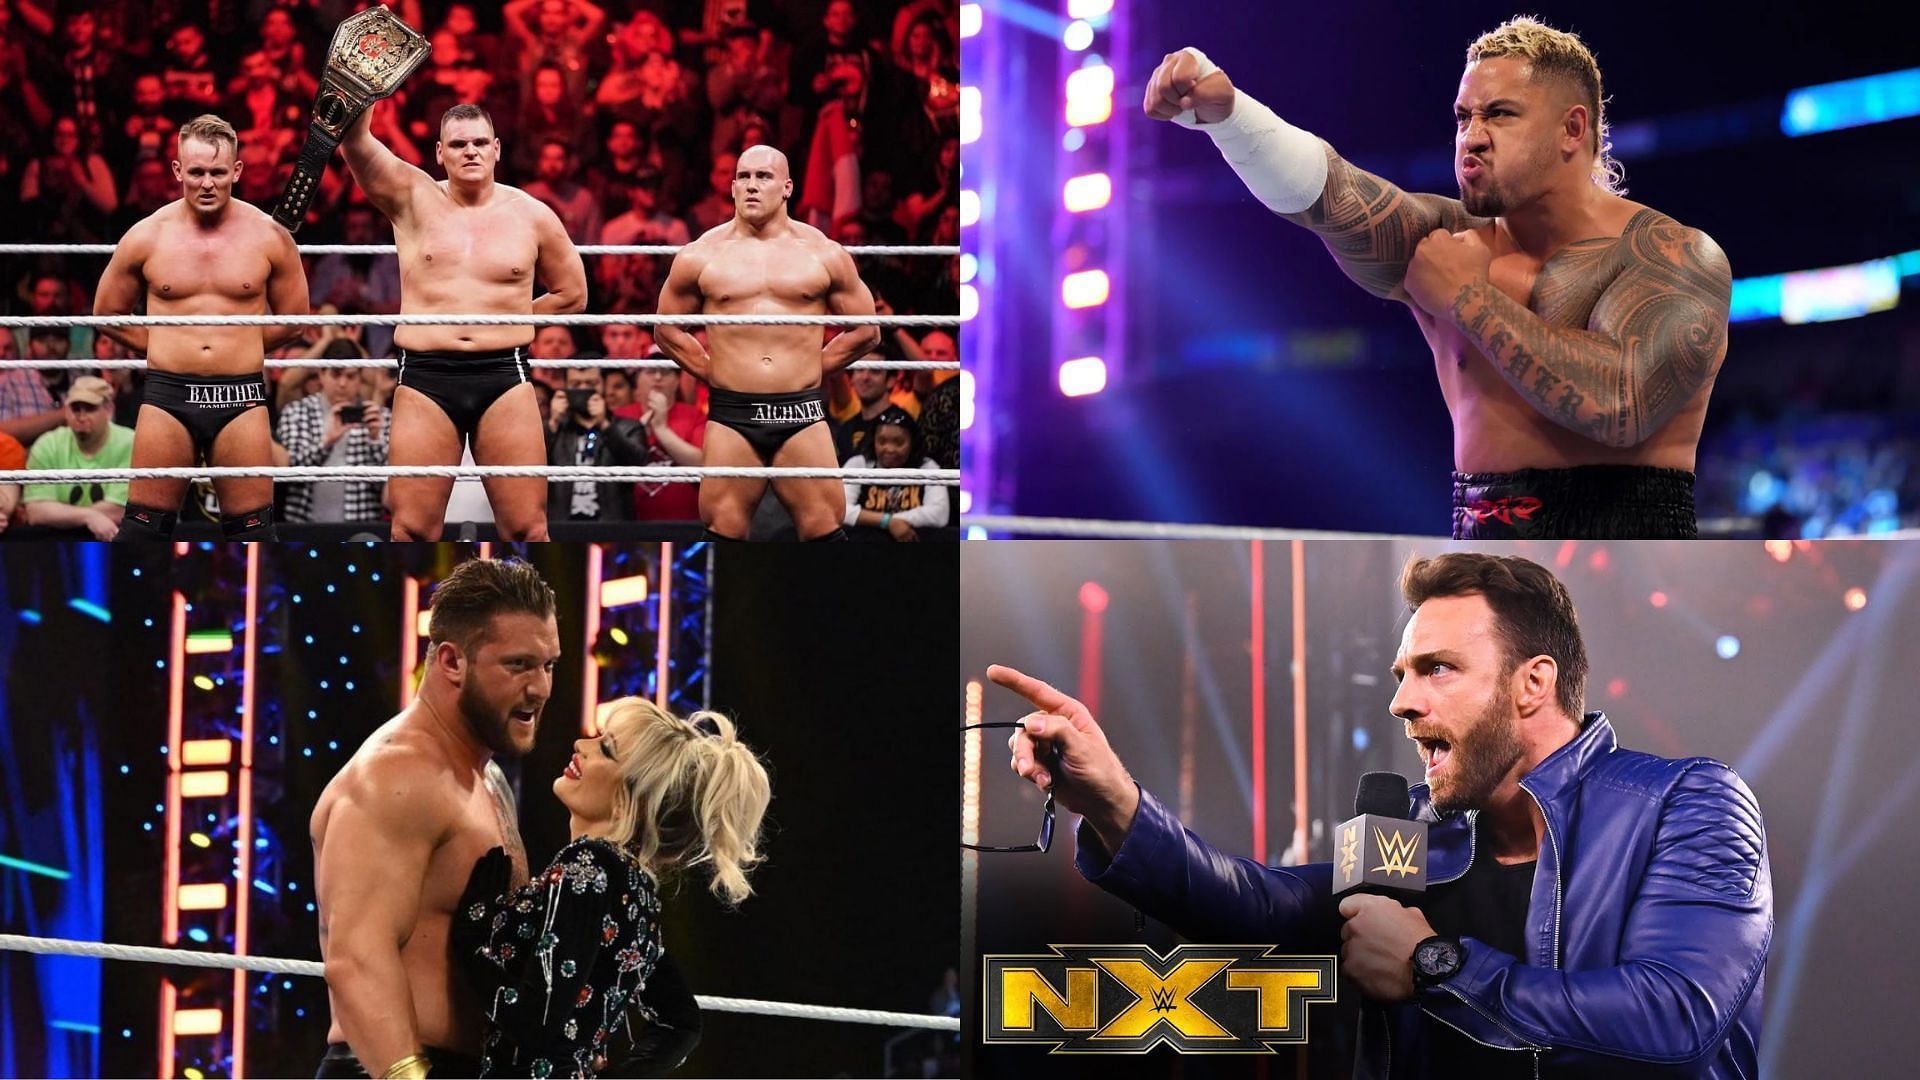 Some NXT imports on the main roster that has made an impact in 2022